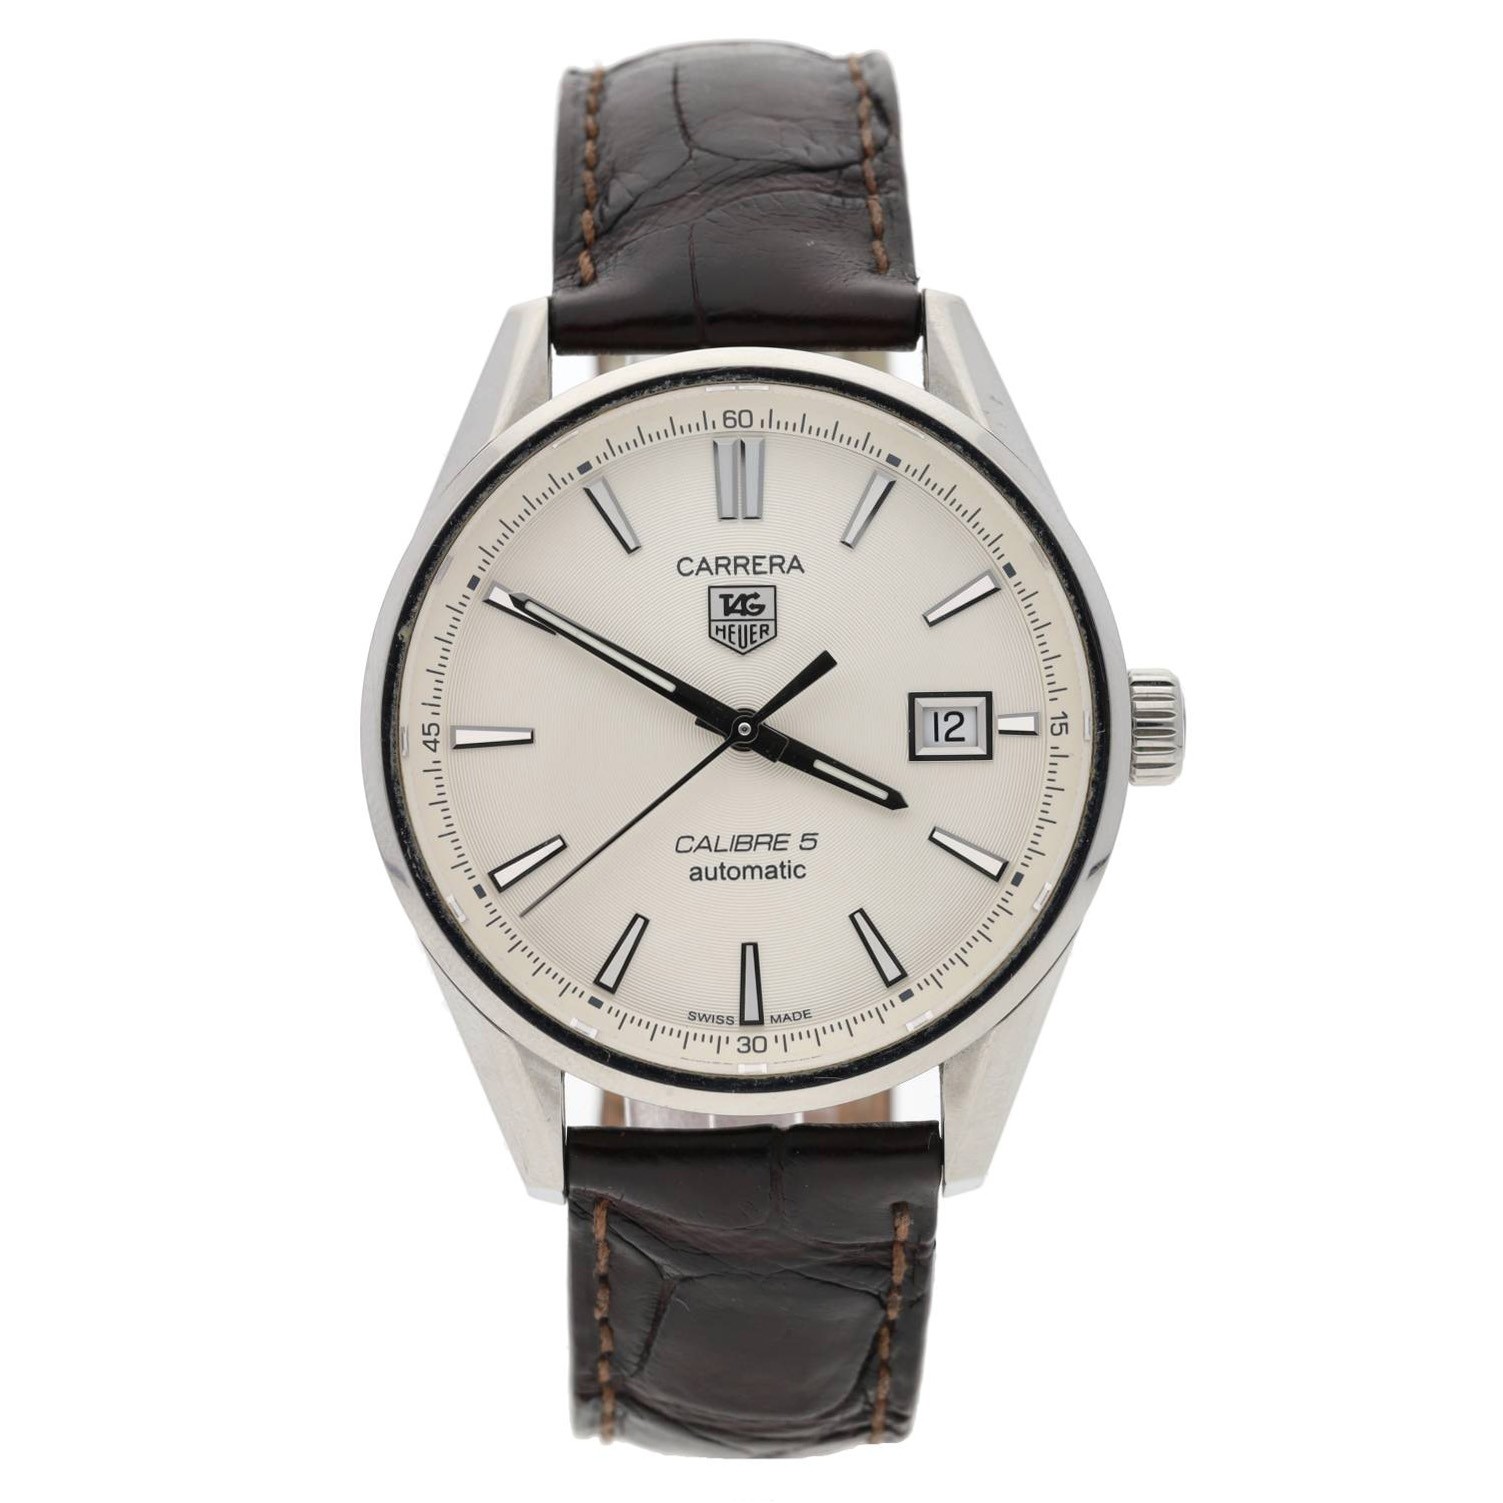 Tag Heuer Carrera Calibre 5 automatic stainless steel gentleman's wristwatch, reference no.